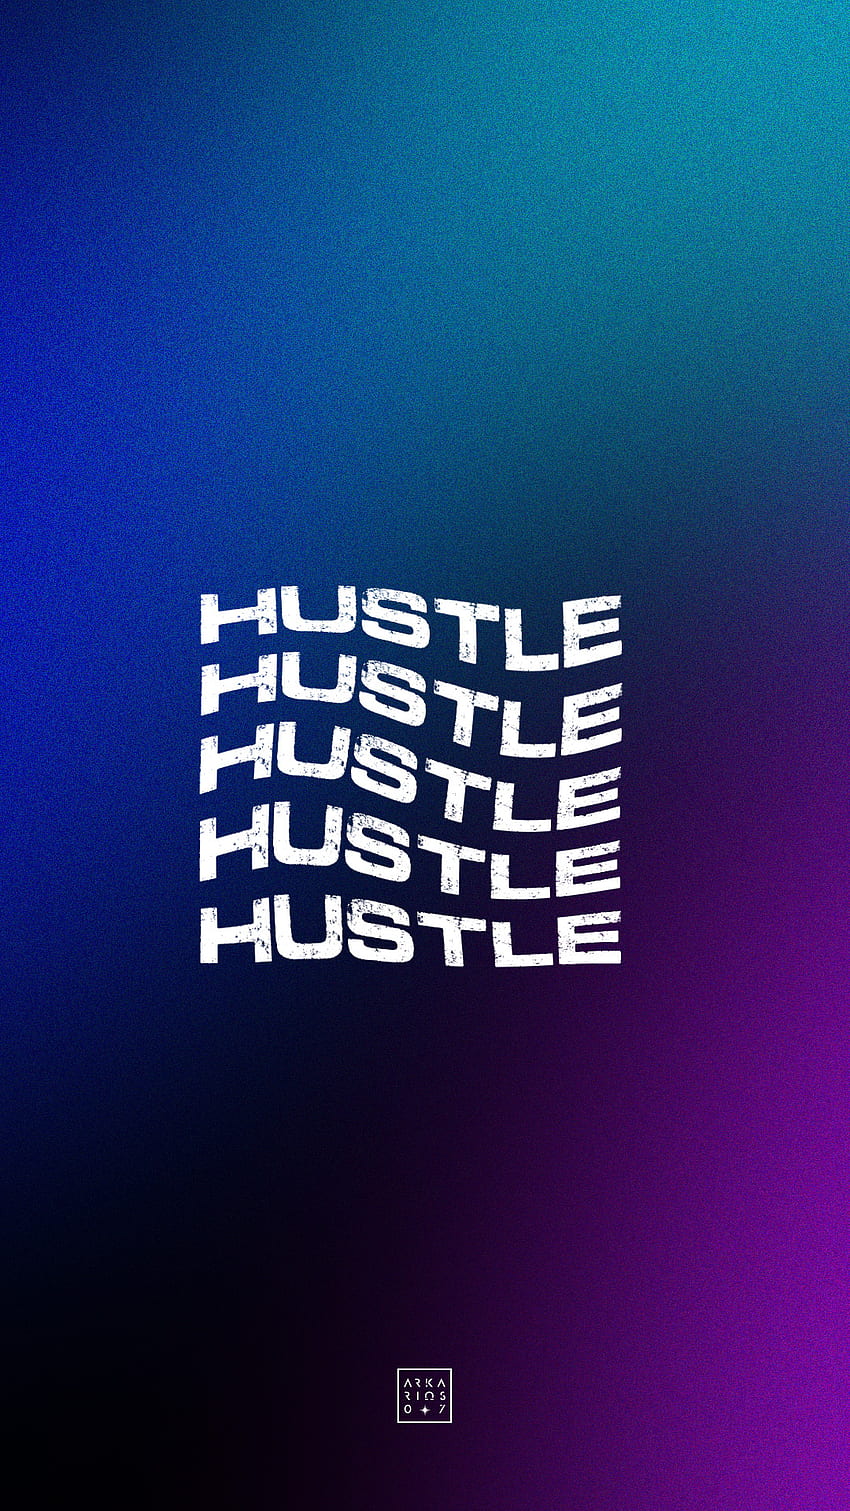 1920x1080px, 1080P Free download | Hustle, aesthetic, typography ...